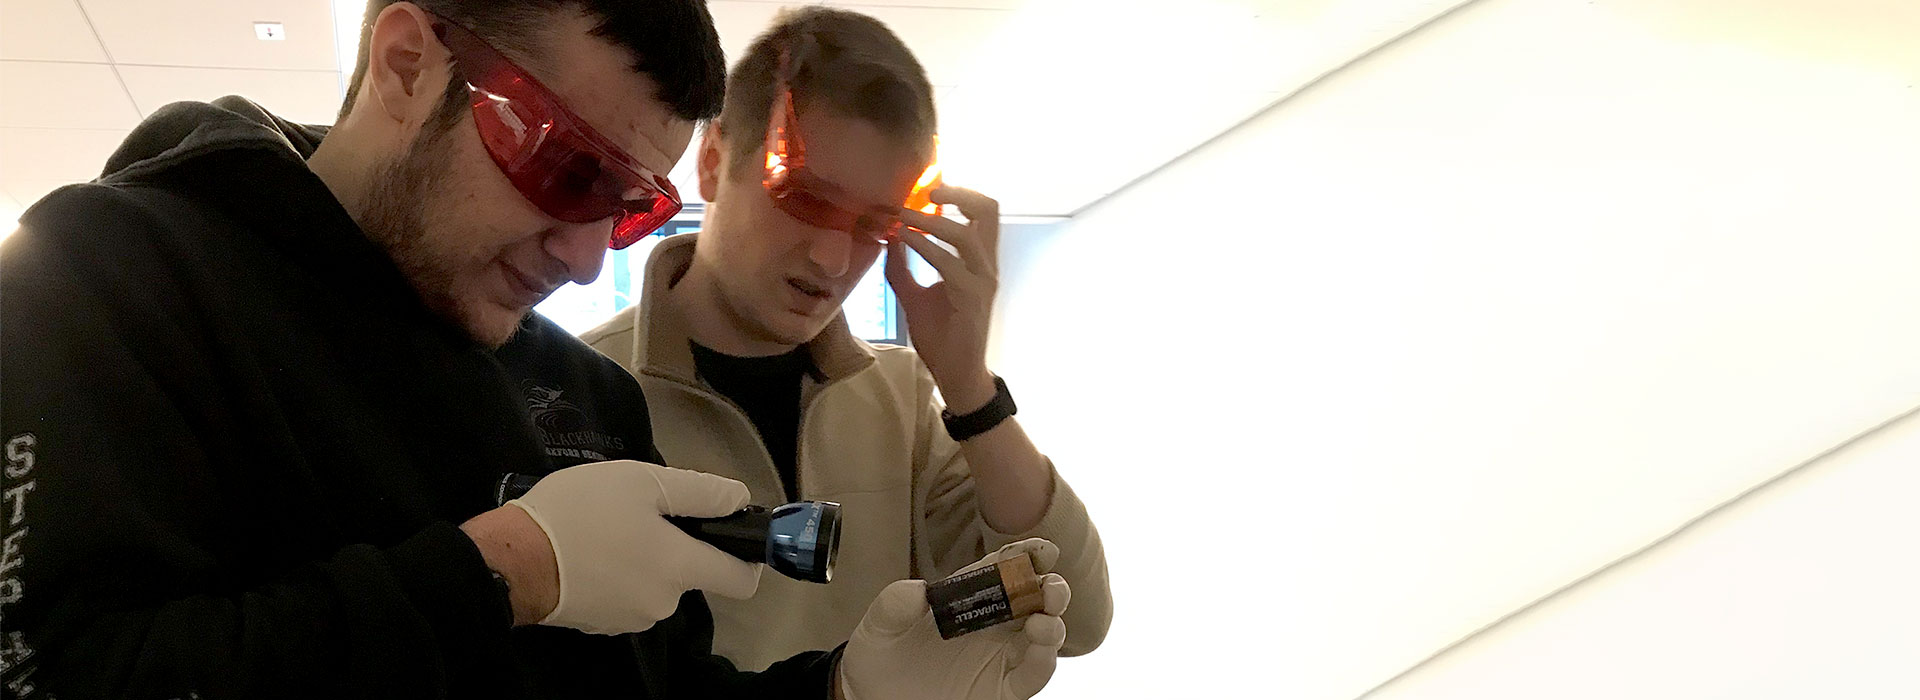 Two criminal justice students investigate a battery.